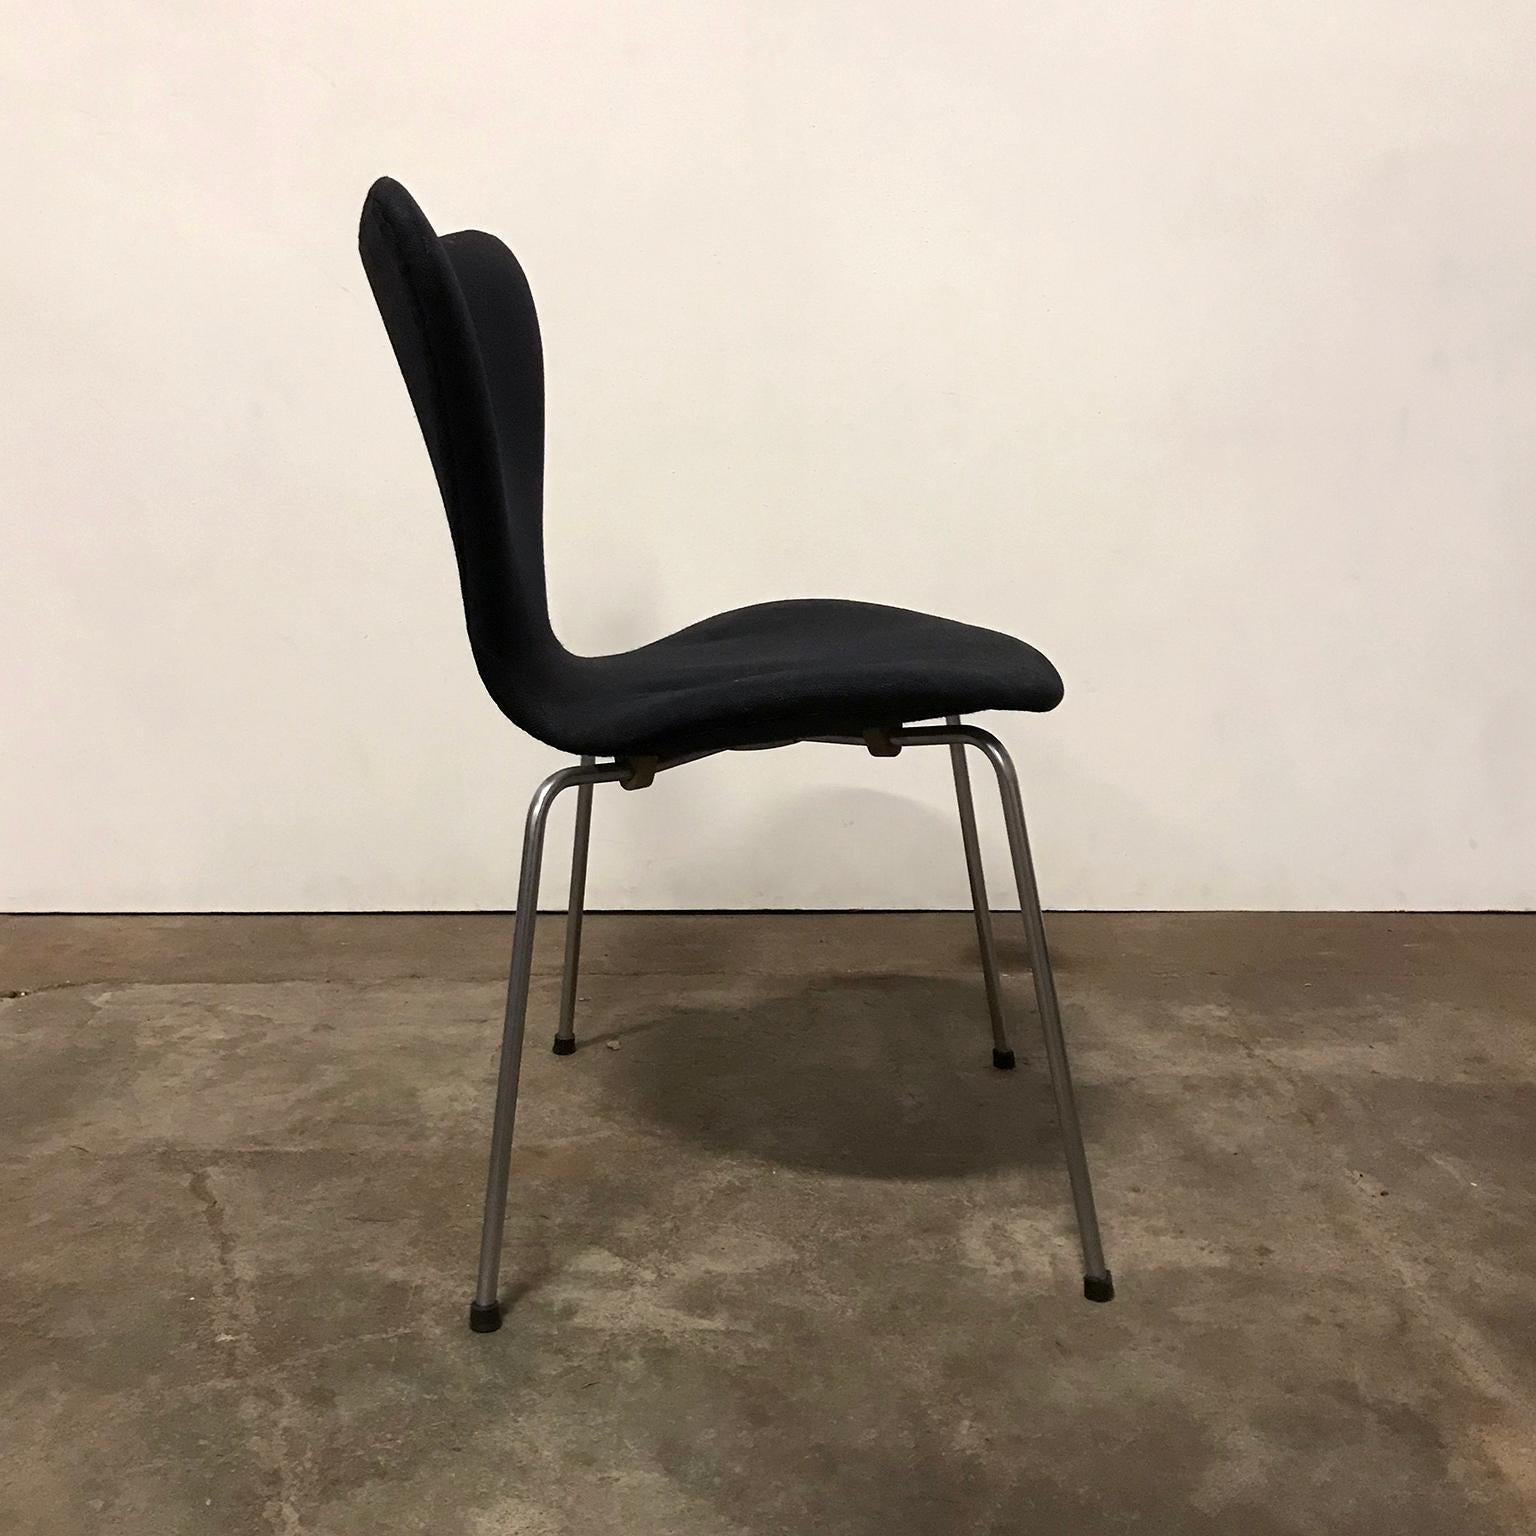 Set of three butterflies in black upholstery by Fritz Hansen. These butterflies, with their elegant design, show traces of wear like some tiny damage and stains on the fabric of the upholstery (picture #8). One chair is quite good (#9), the second